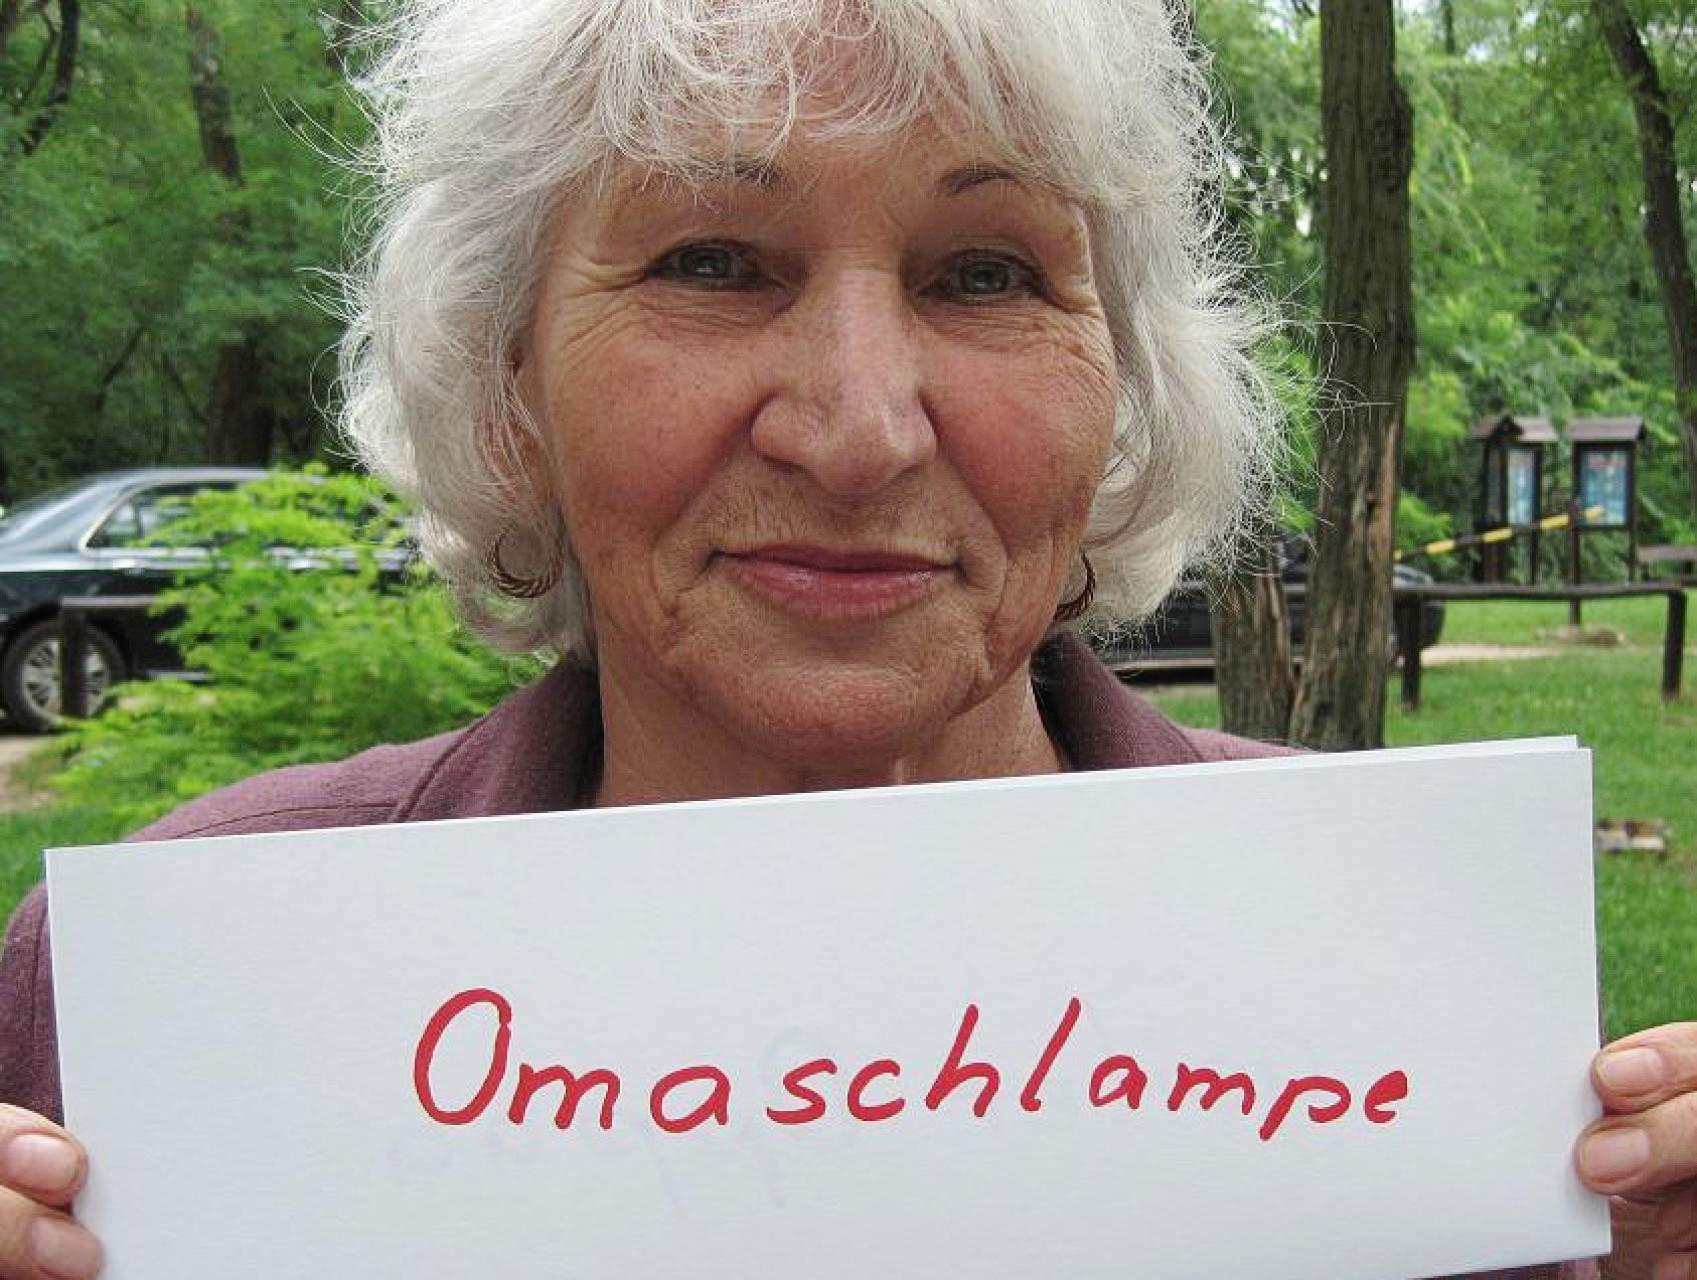 Oma schlampe